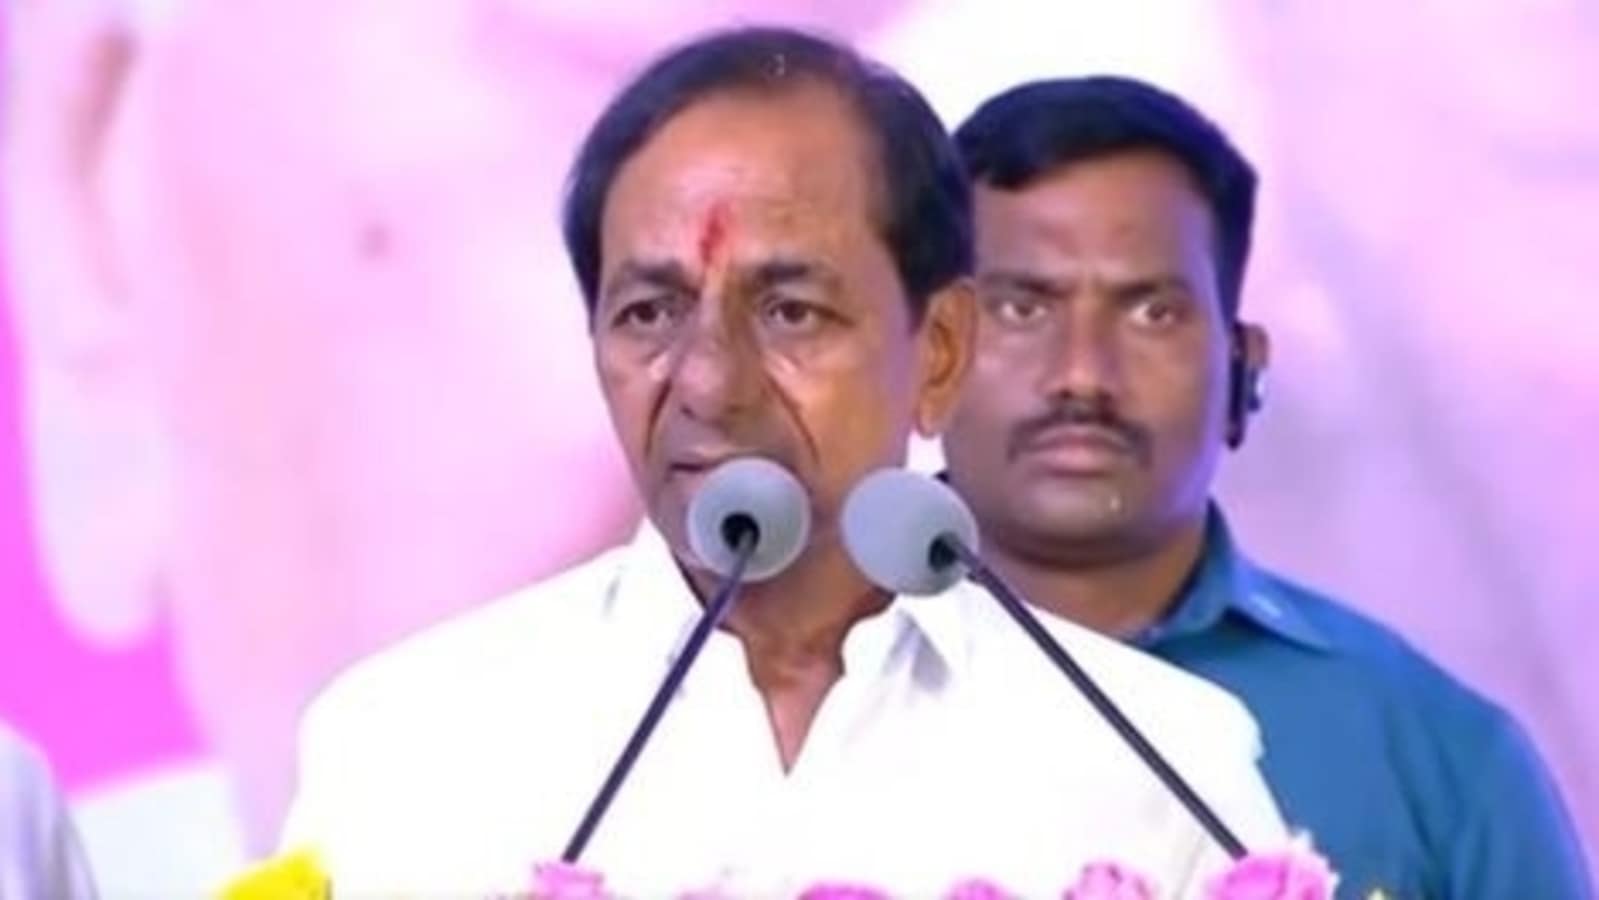 KCR counters 'You are next' jibe, dares BJP to topple his govt; 'Then I  will...' | Latest News India - Hindustan Times